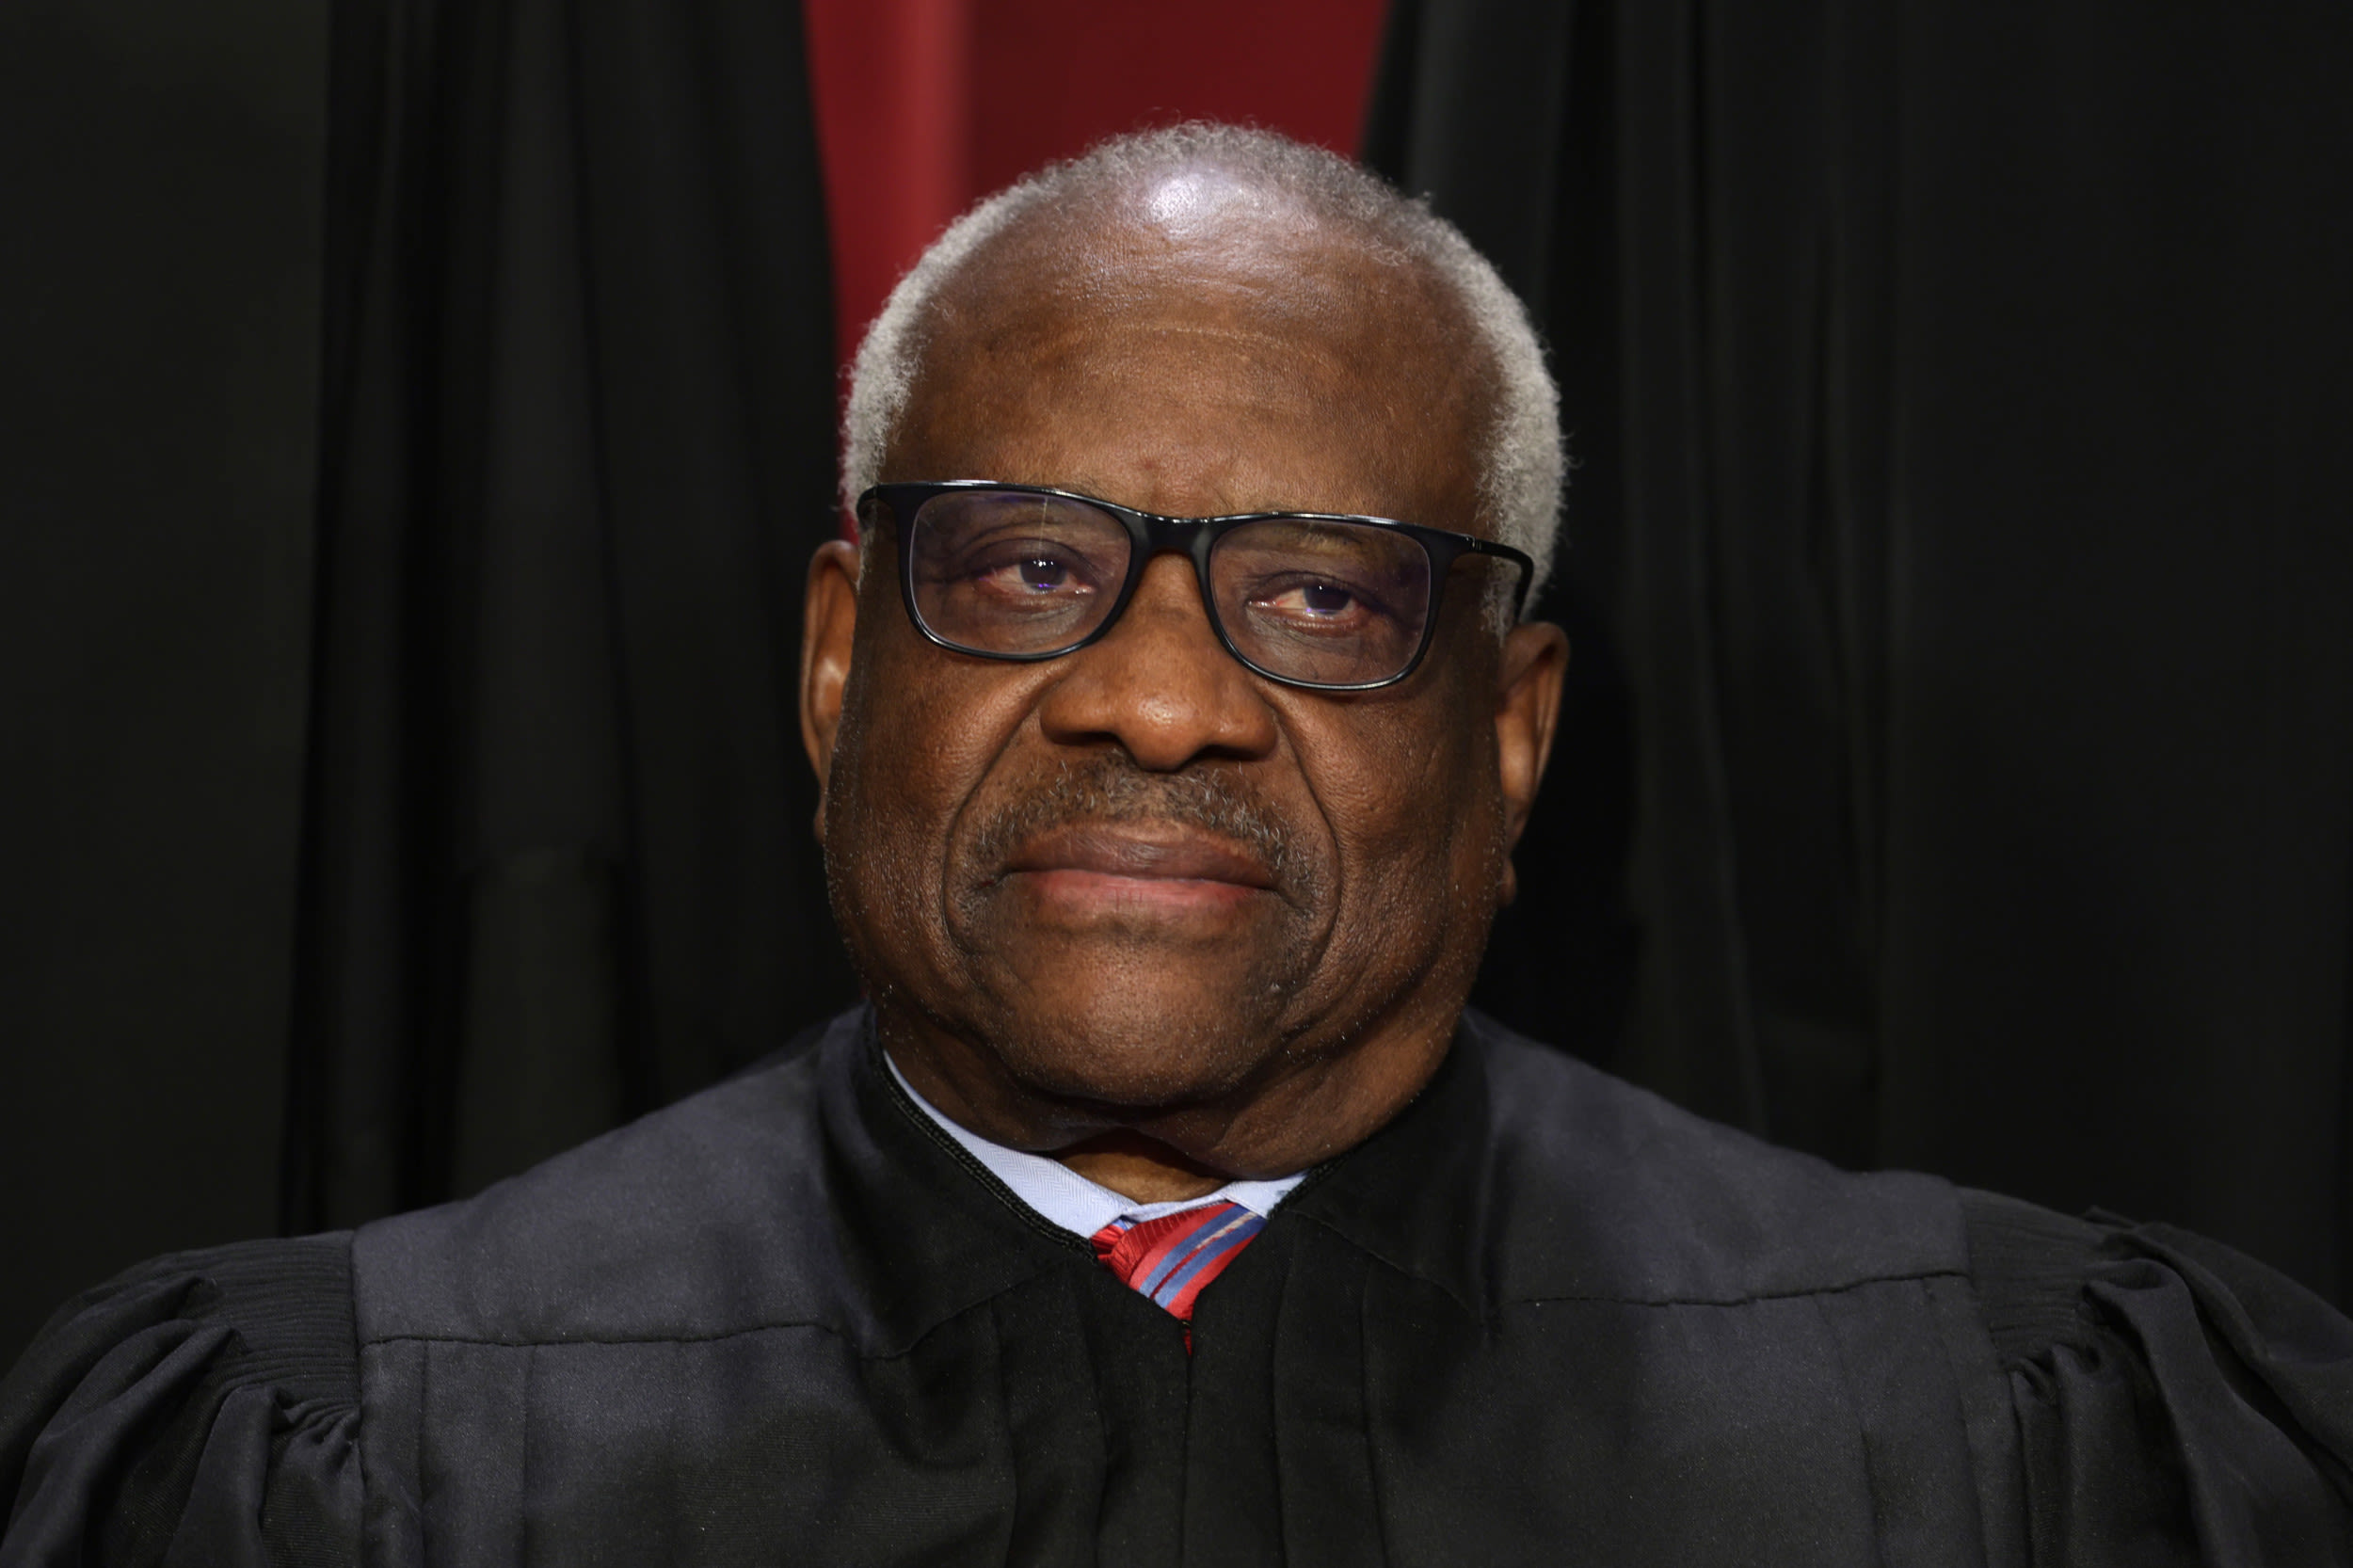 Clarence Thomas opinion sparks fury: "My God"